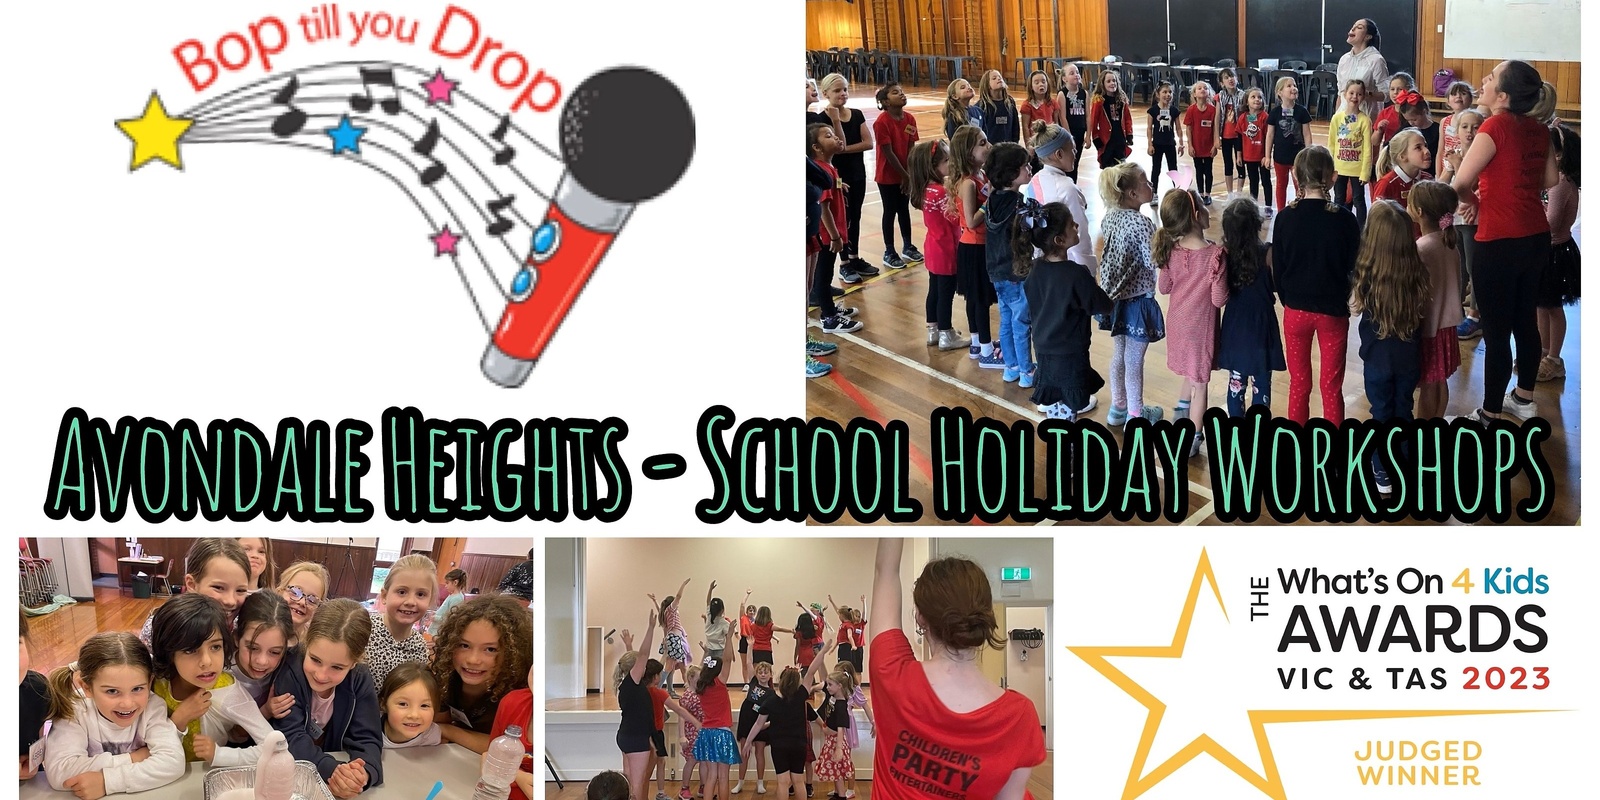 Banner image for Bop till you Drop AVONDALE HEIGHTS School Holiday Performing Arts Workshop